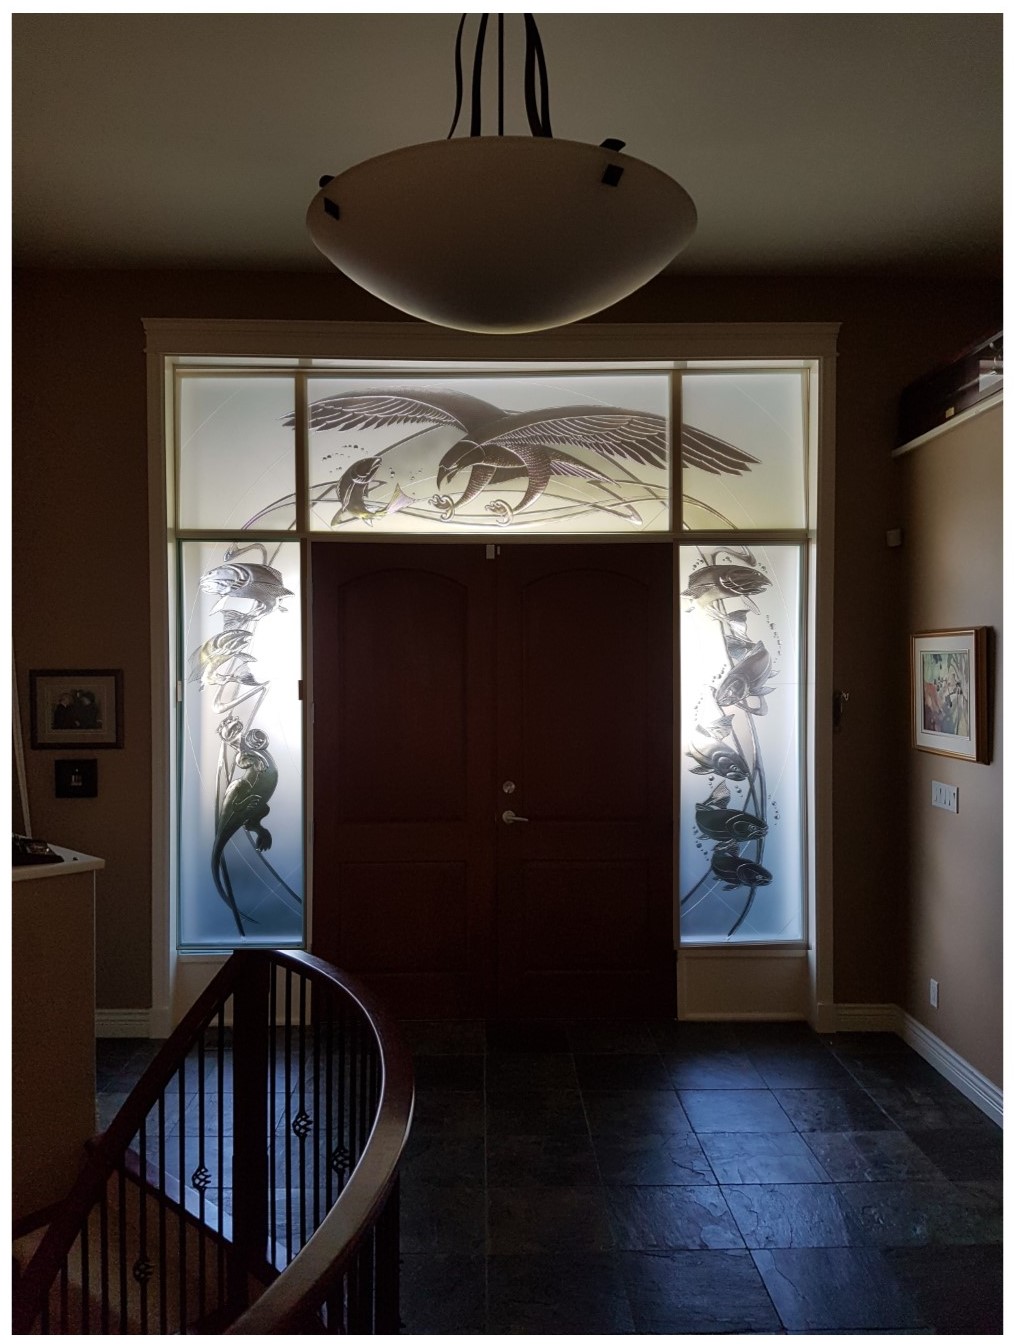 carved glass-etched glass- tempered glass-kiln fired glass-installed specialty glass-residential entry glass-archiectural glass-carved glass eagle-carved glass fish-carved glass otter